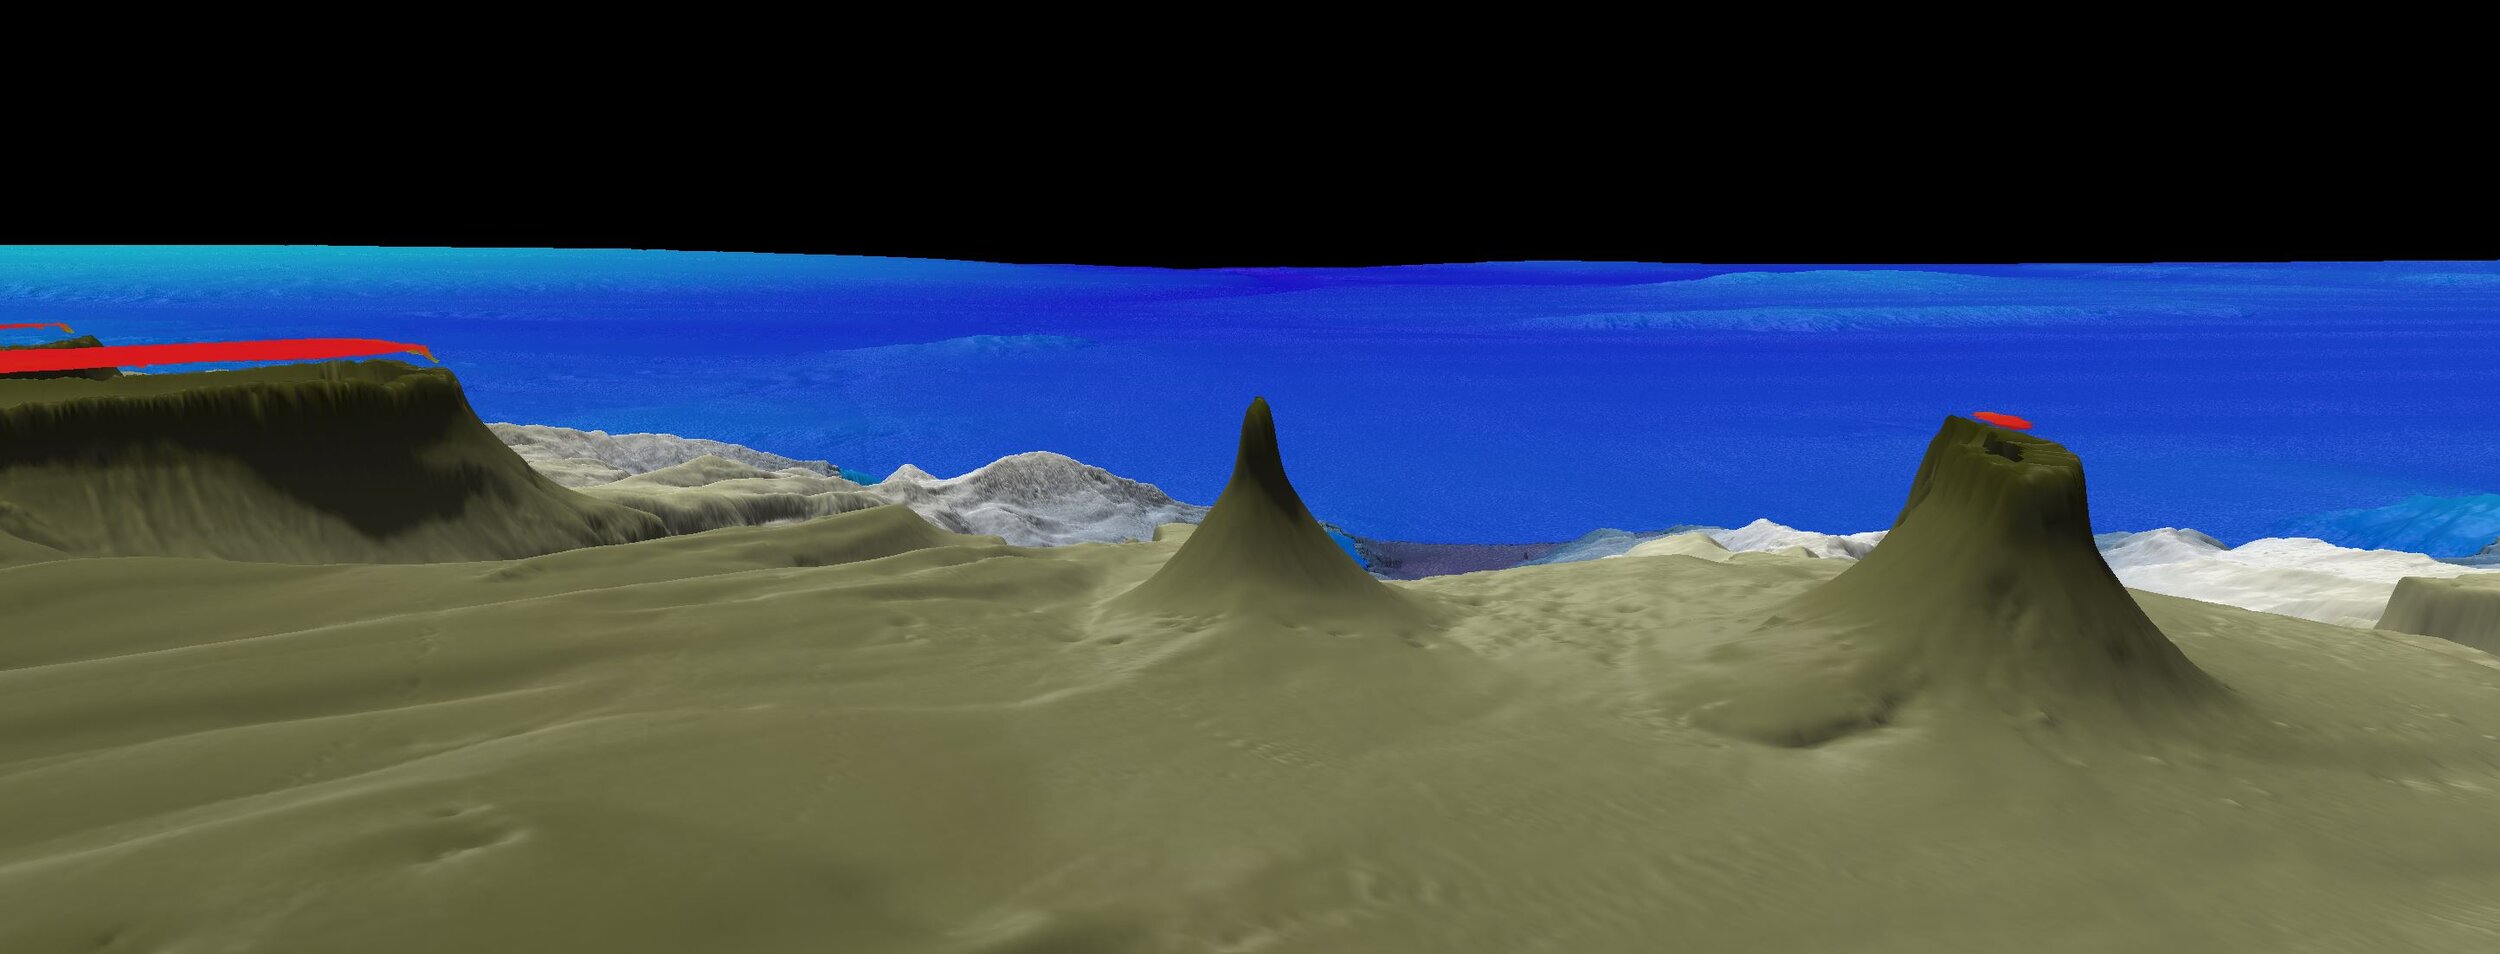 PICTURED: Side mapping profile of the new 500 meter high reef. Photo credit: Schmidt Ocean Institute.